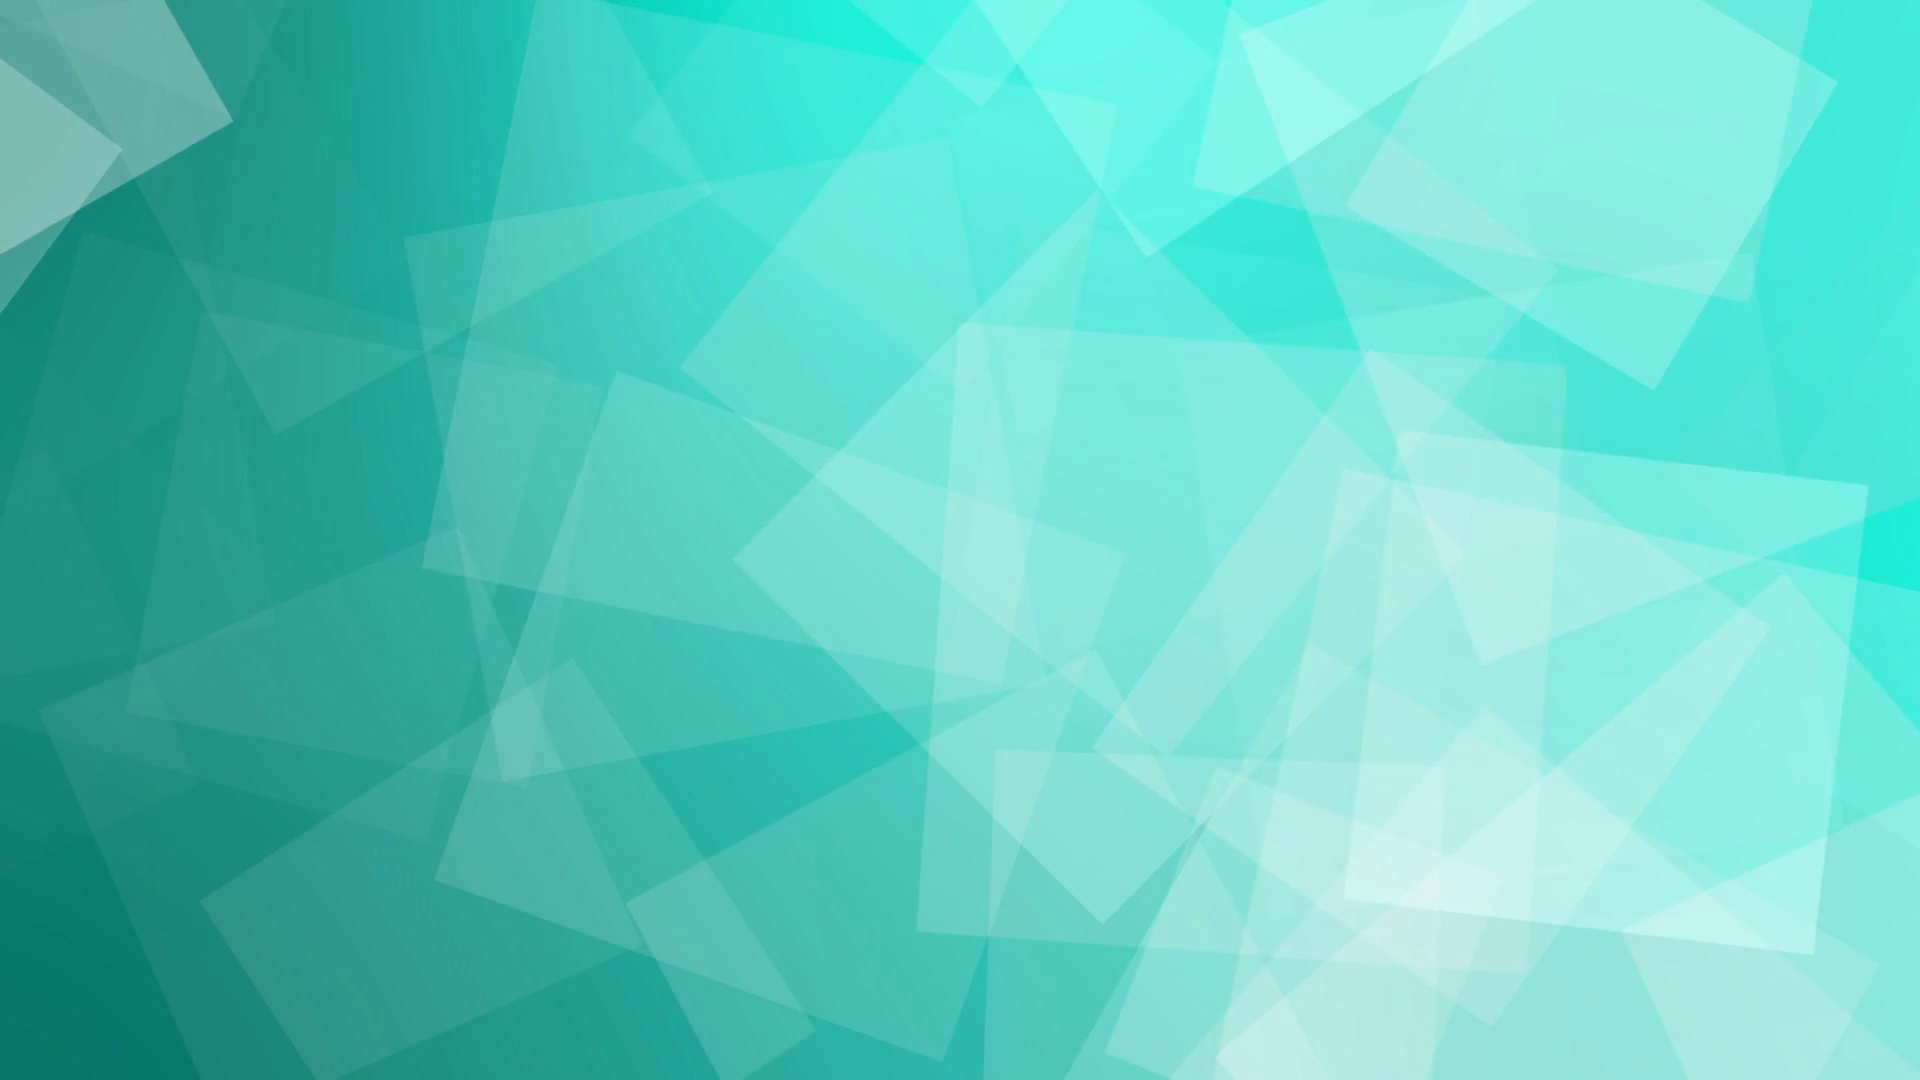 Teal Backgrounds download free 